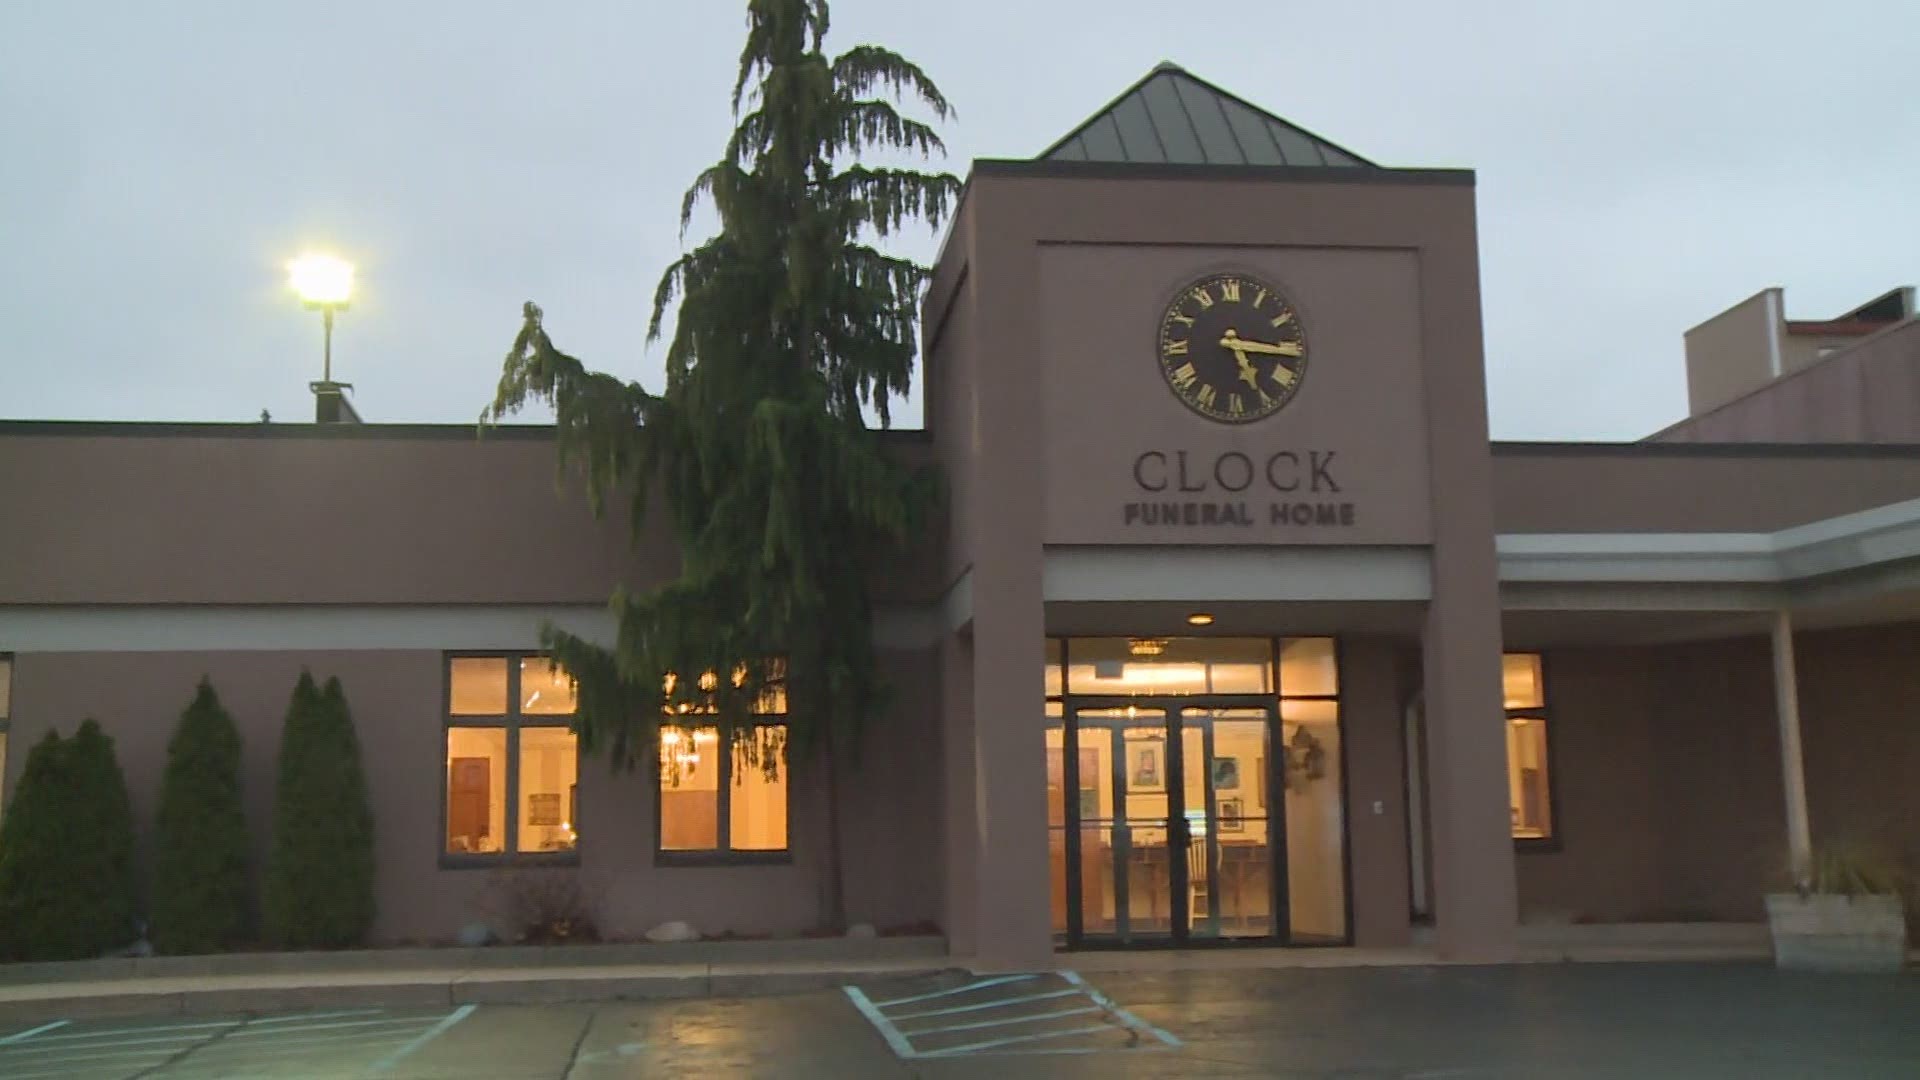 Clock Funeral Home says they have been overwhelmed and they show no signs of slowing down.